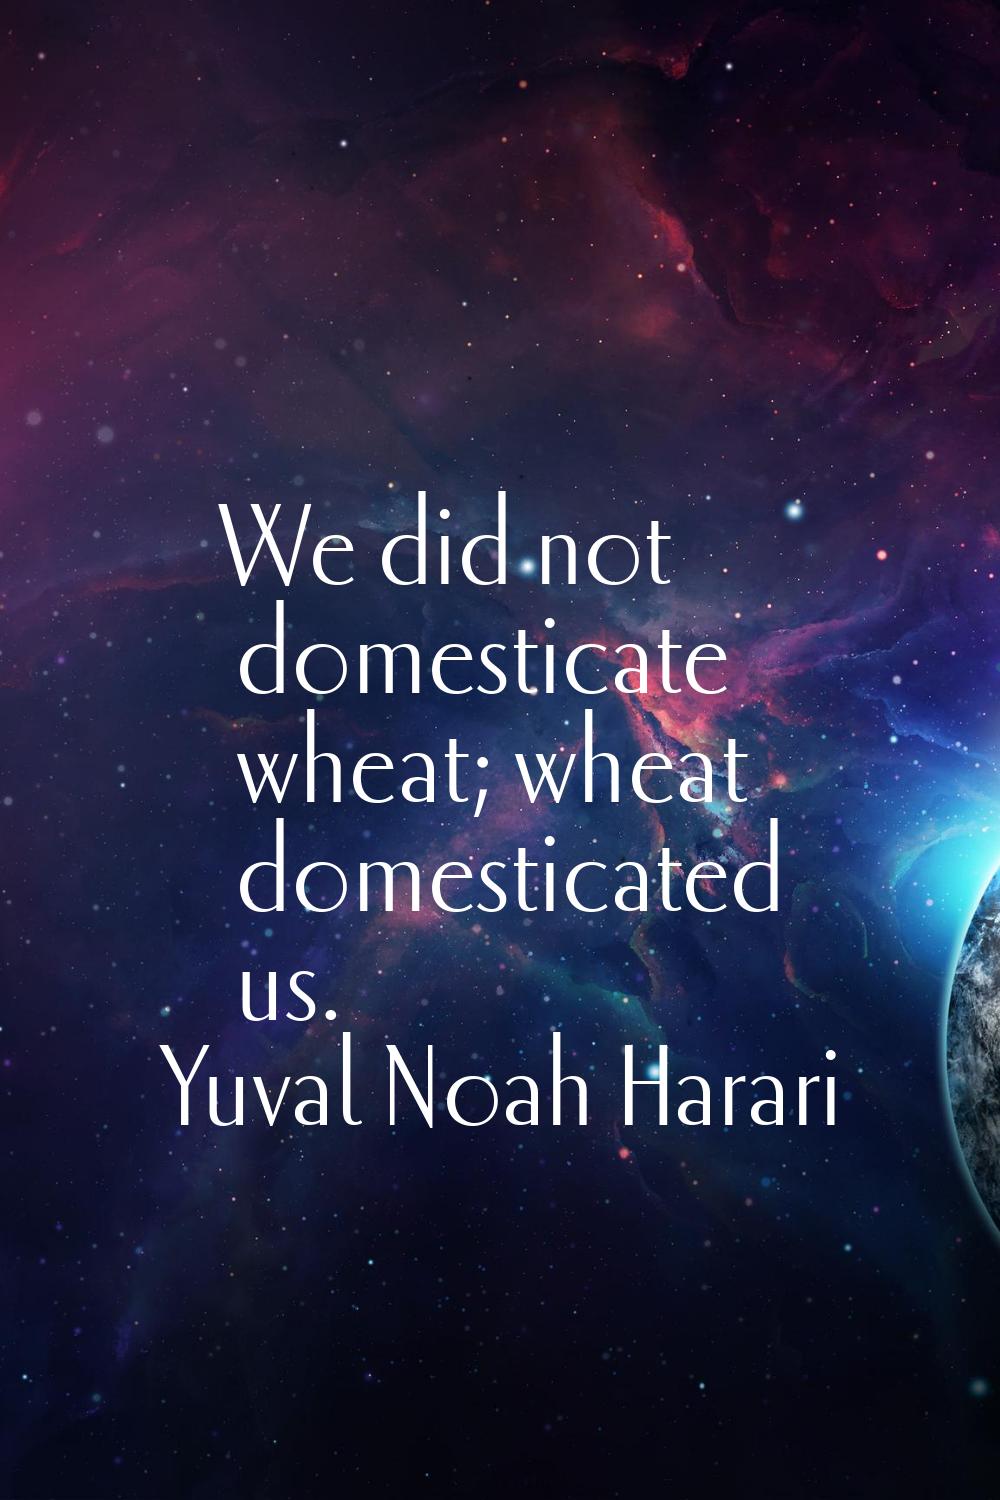 We did not domesticate wheat; wheat domesticated us.